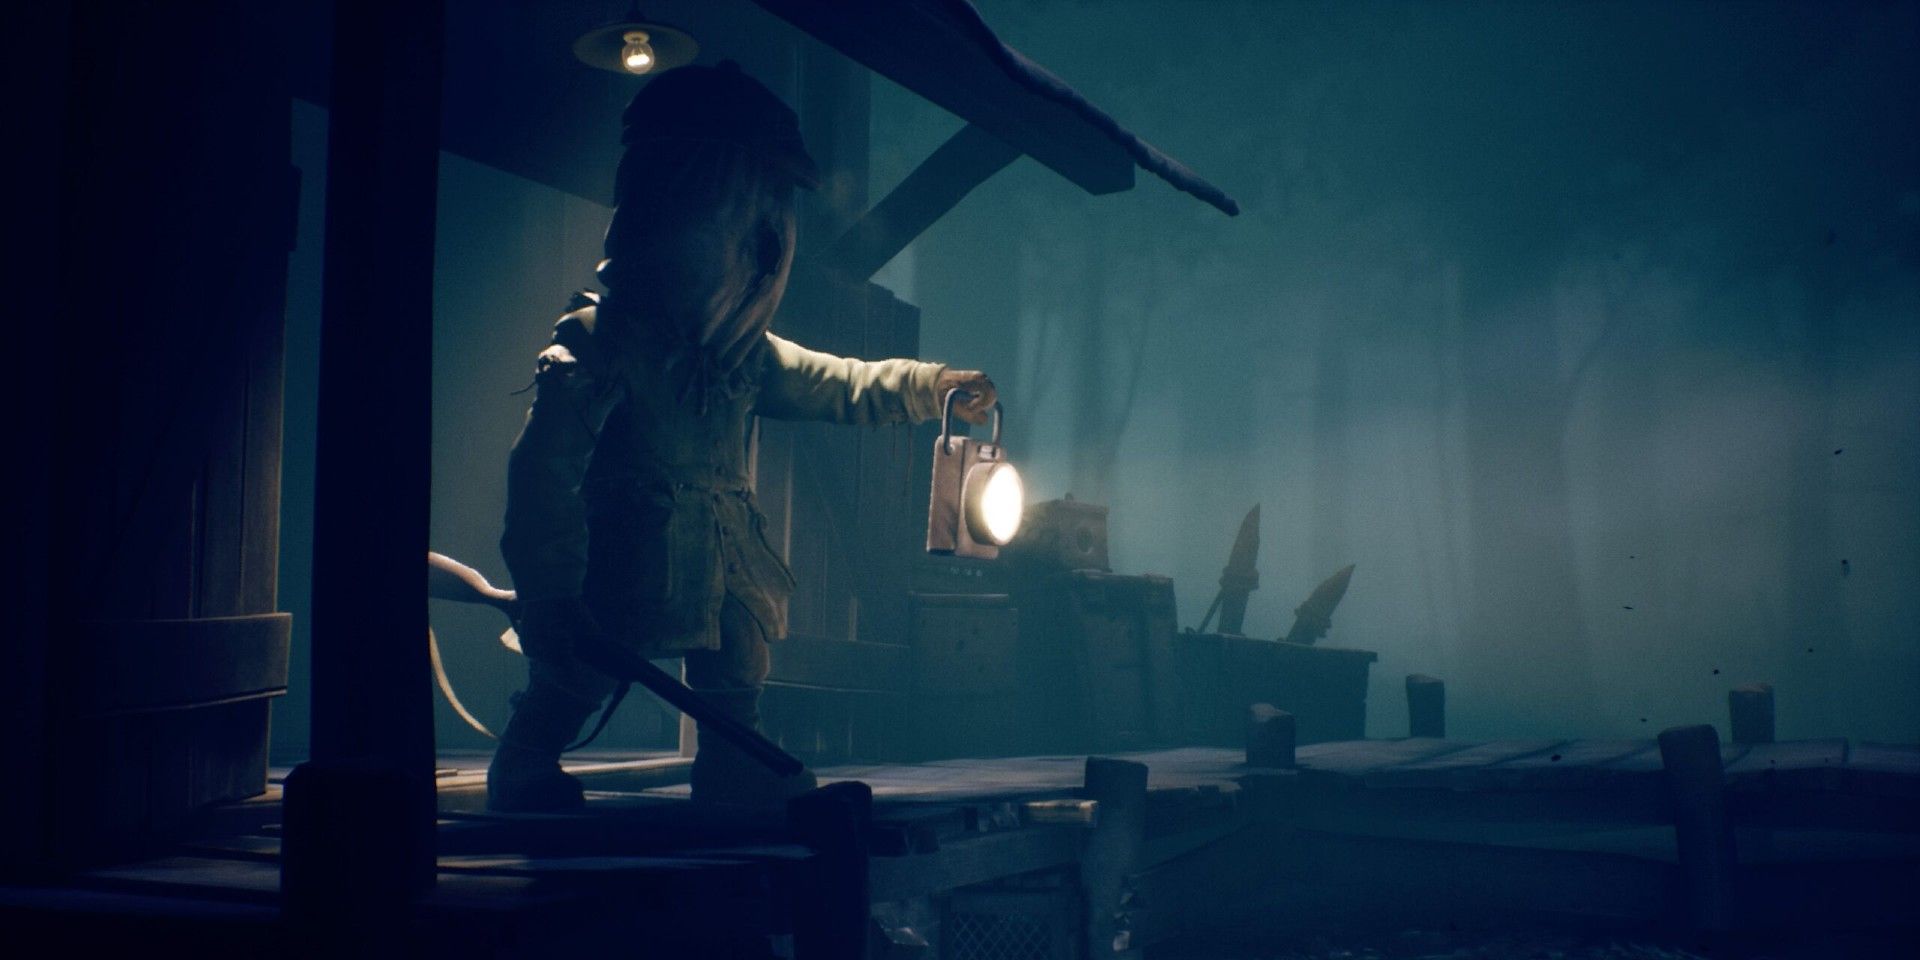 Little Nightmares Developer Teases New Project In Creepy Video